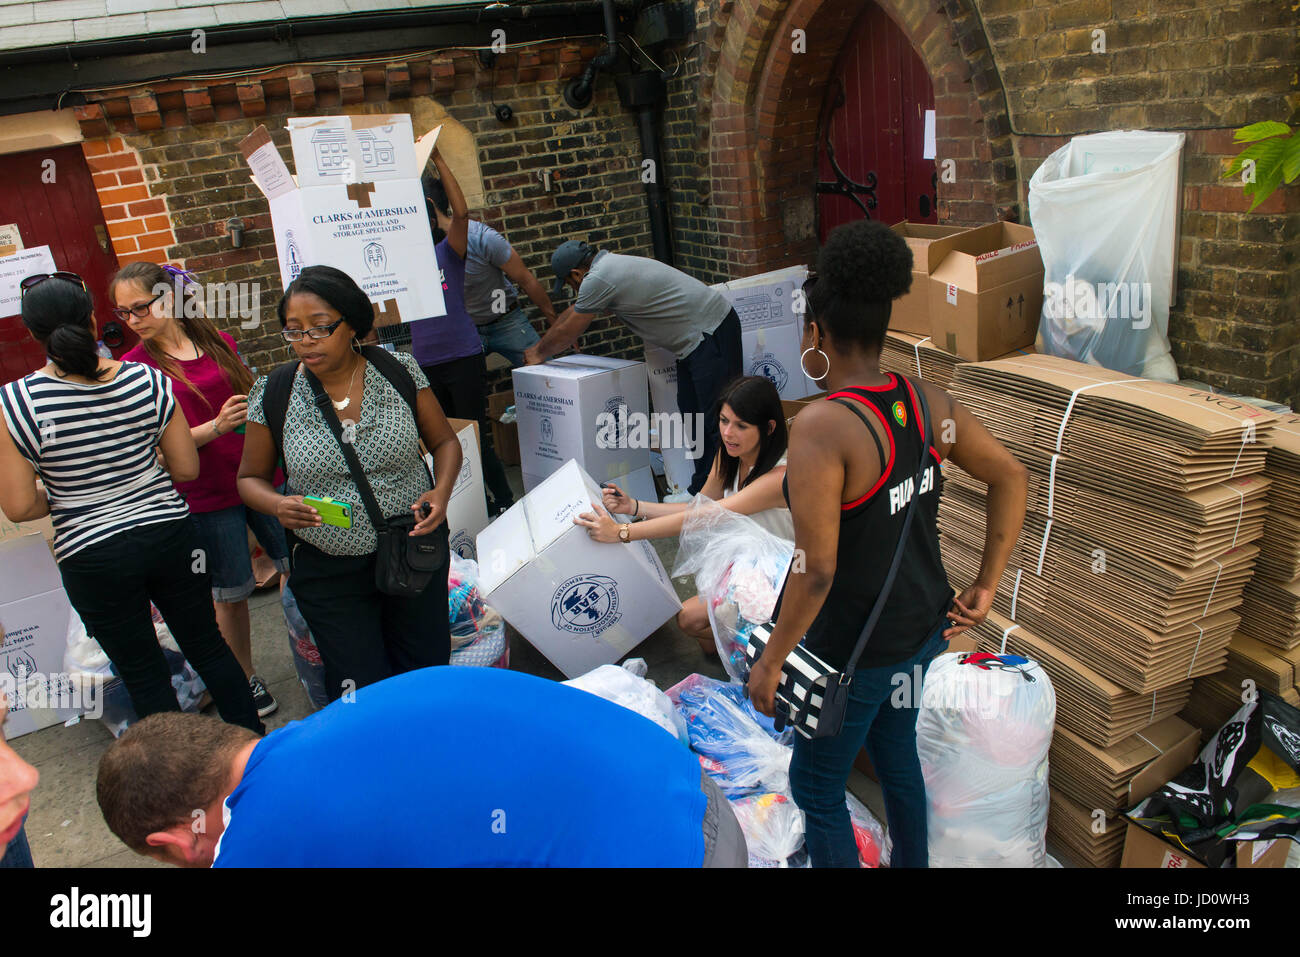 London, United Kingdom. 17th June 2017. Volunteers help distribute items to help those affected by the fire at Grenfell Tower, following the June 14 fire. Michael Tubi / Alamy Live News Stock Photo